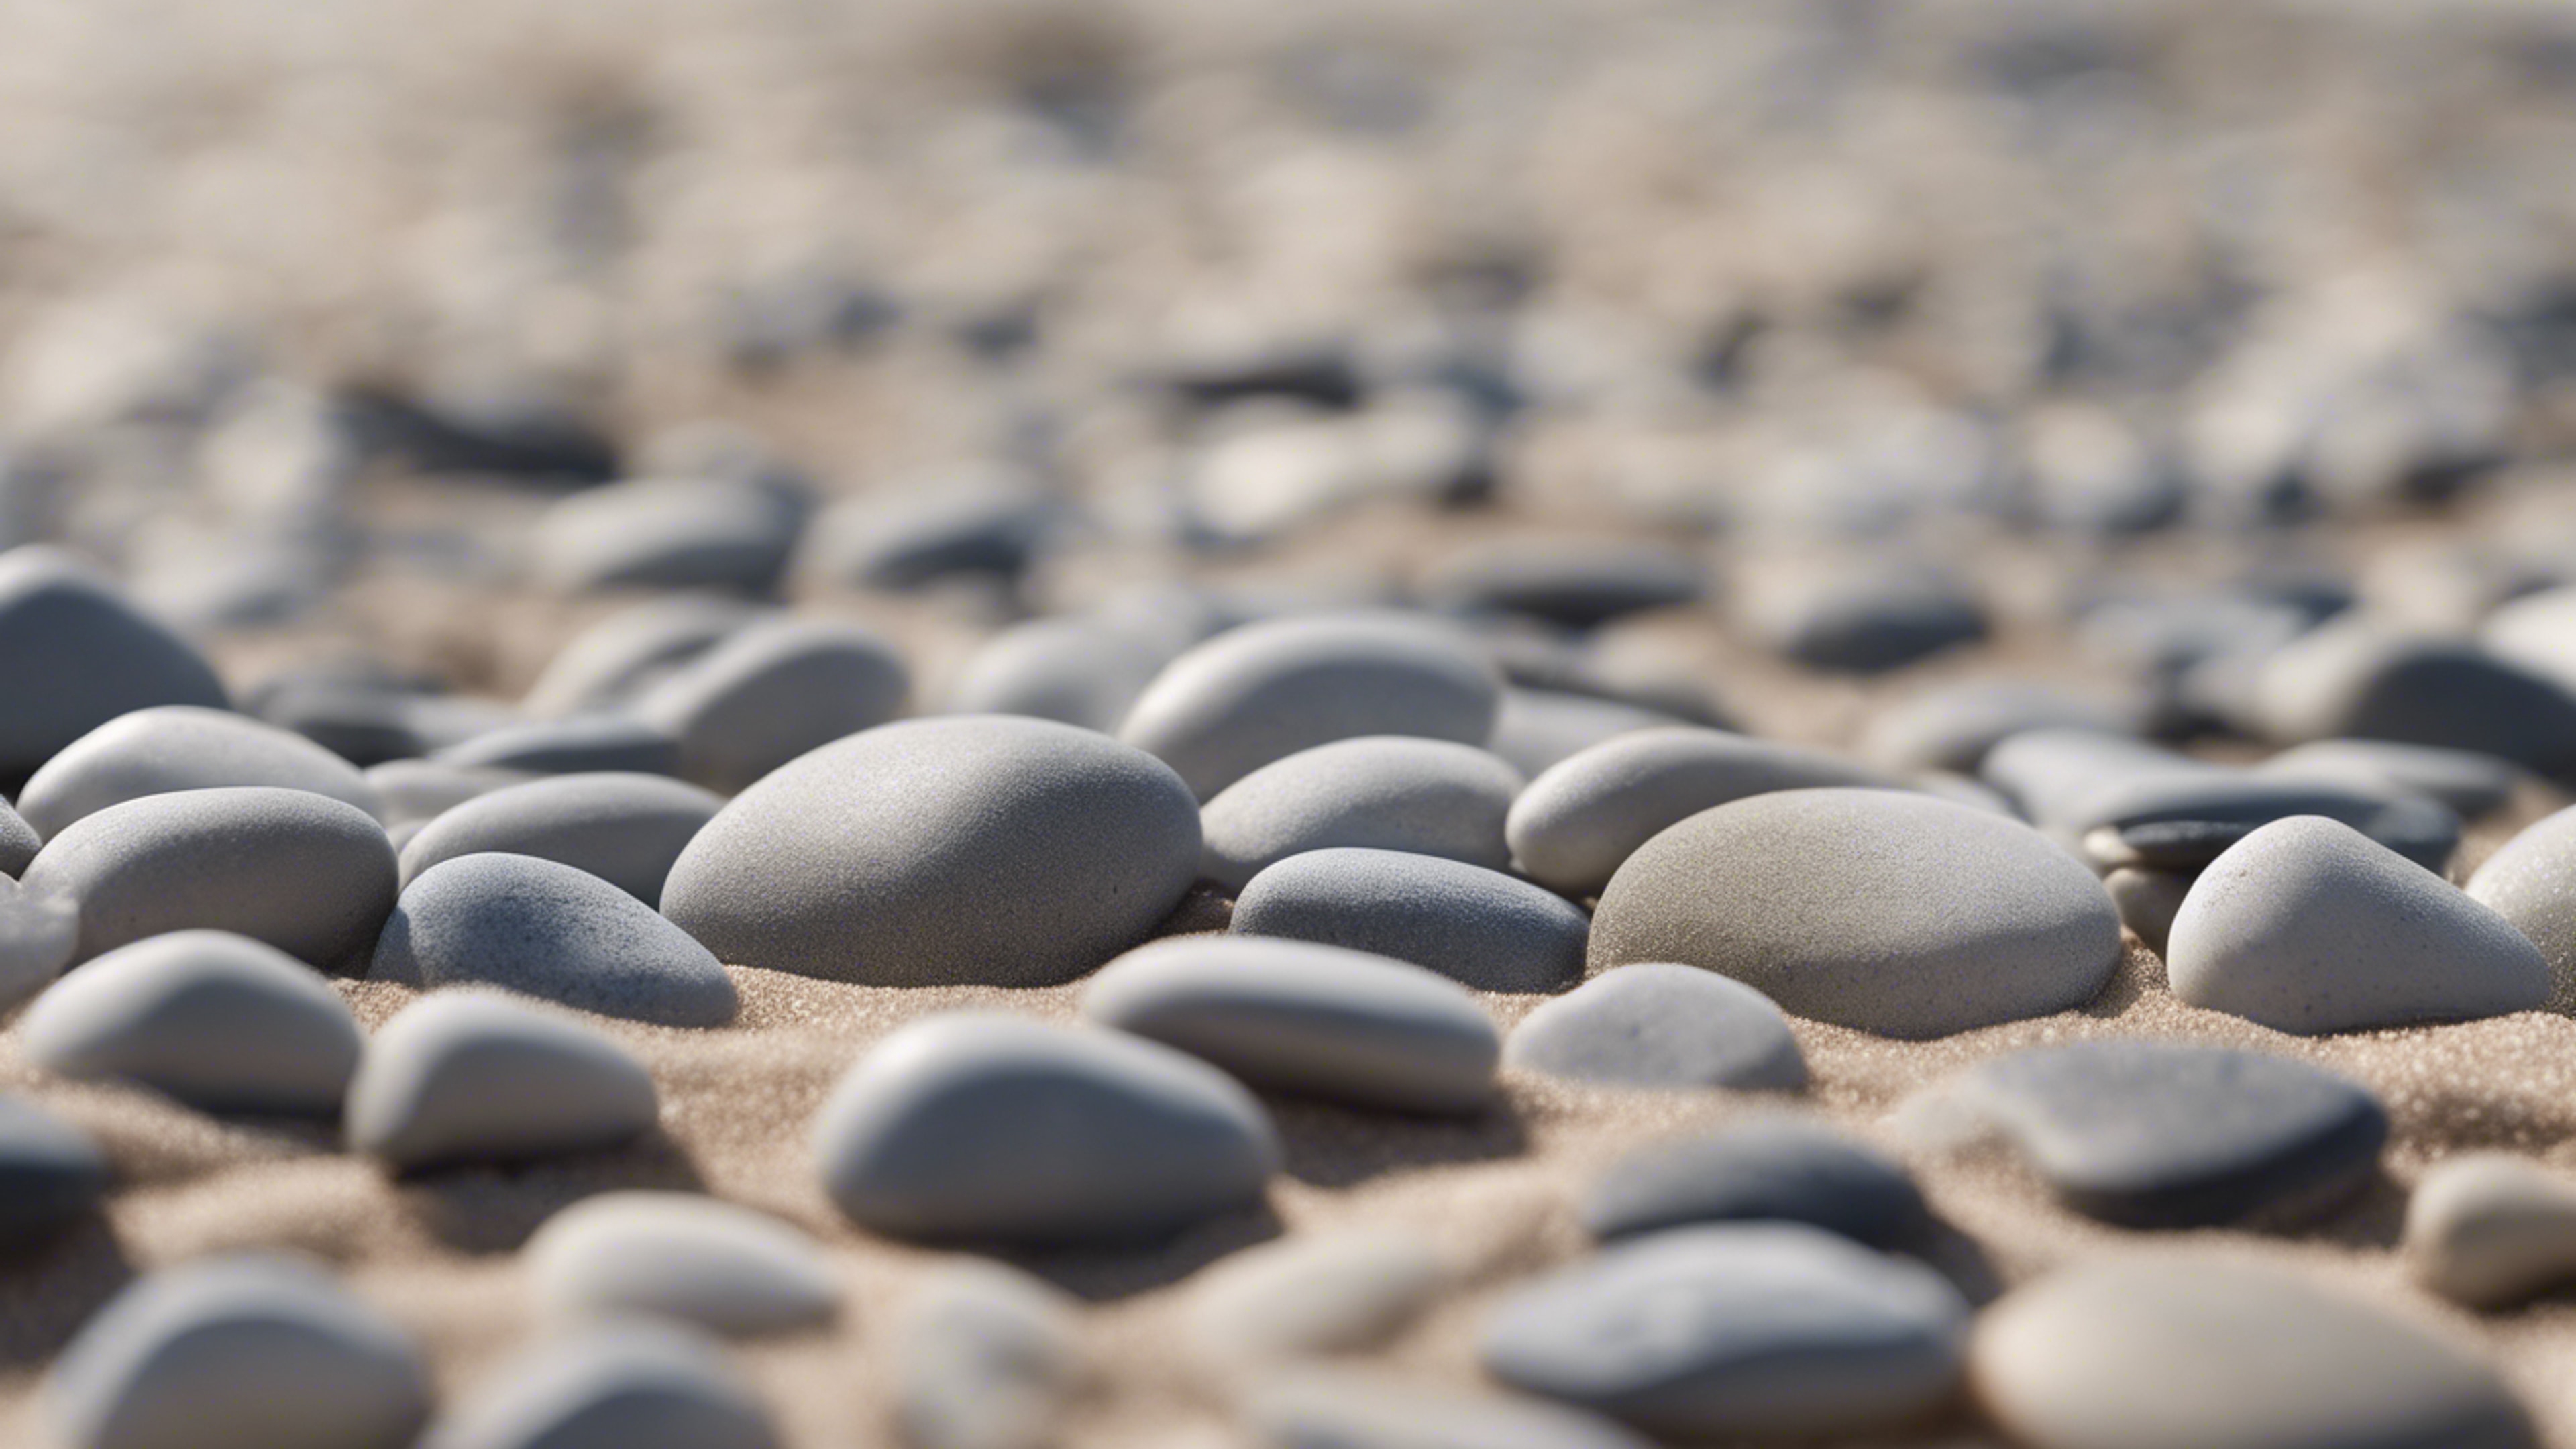 A collection of light gray pebbles arranged in an intricate pattern on a sandy beach. Tapeta[7440af21c01a4a2abeaf]